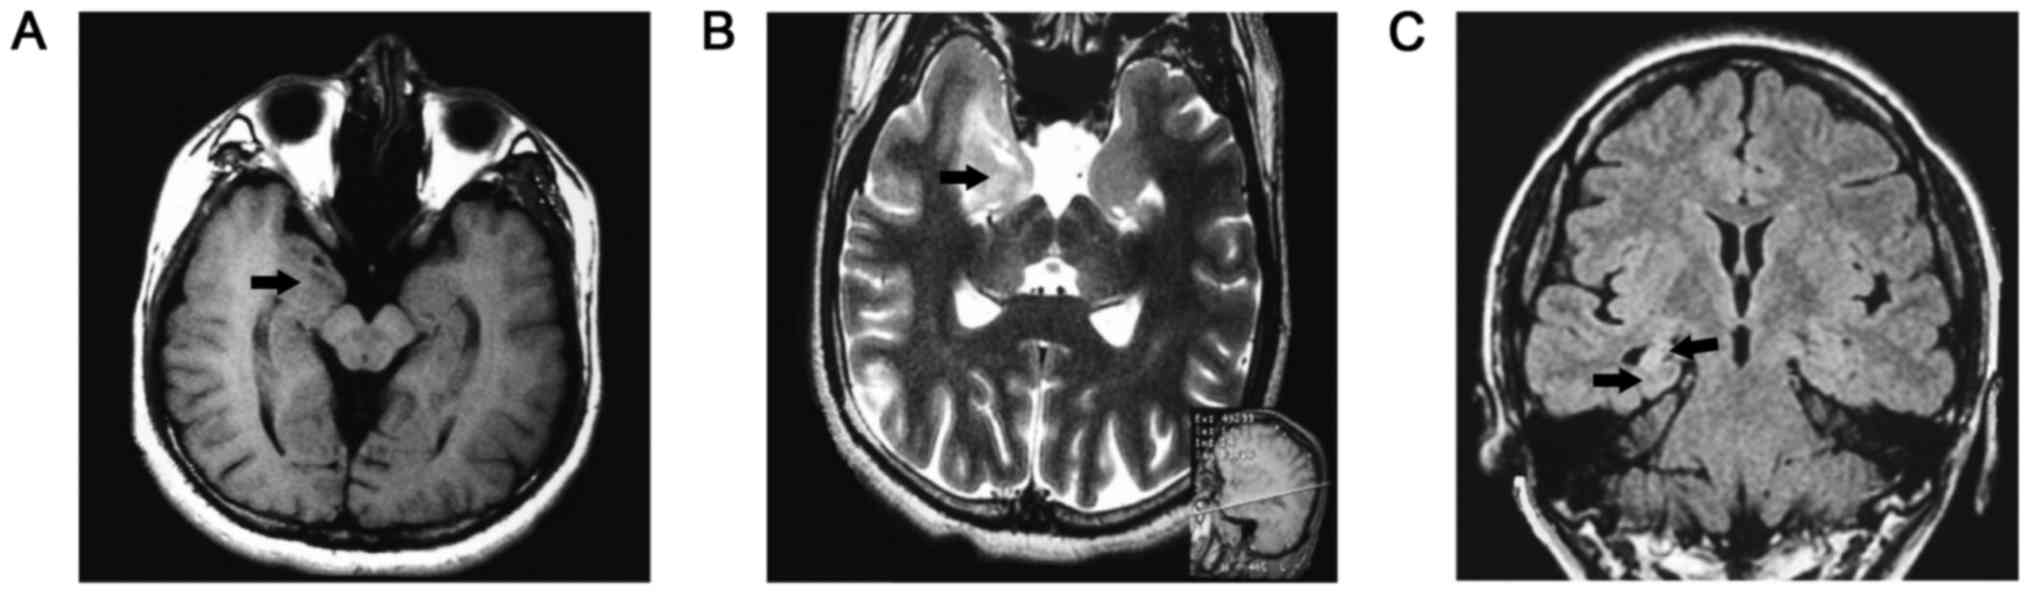 Temporal Lobe Epilepsy In Patients With Nonlesional Mri